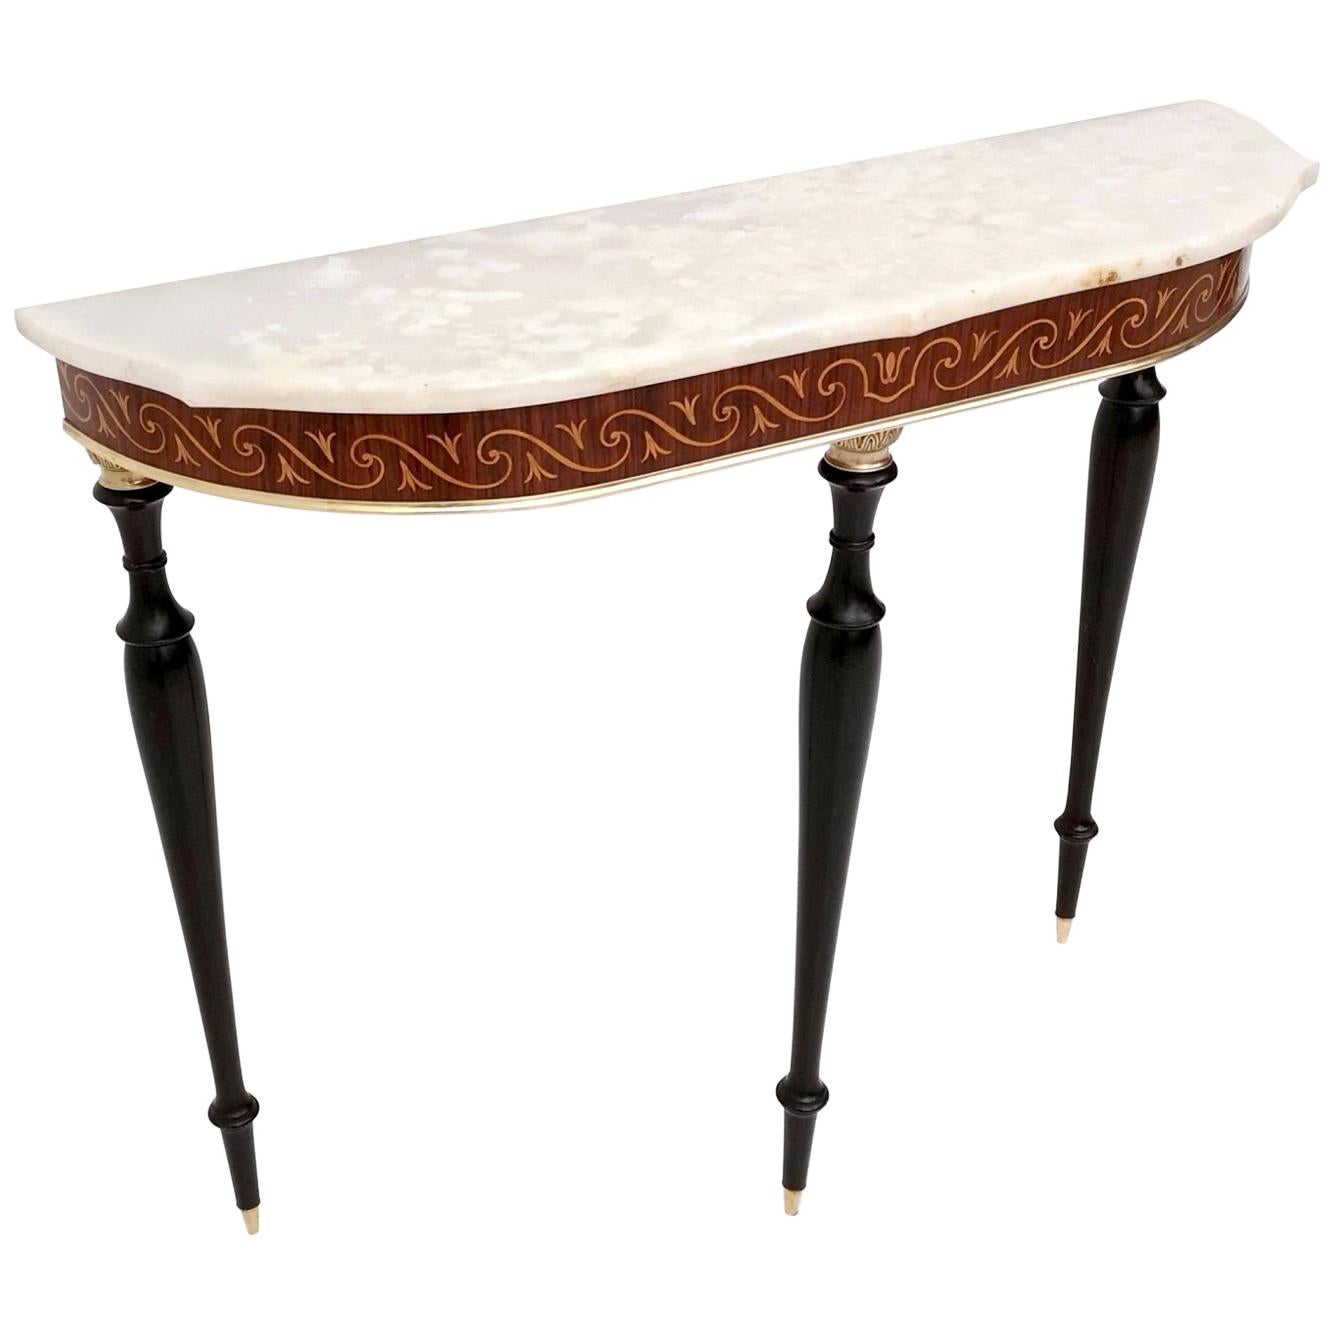 Vintage  Wooden Console Table with Demilune Onyx Top and Inlaid Edges, Italy